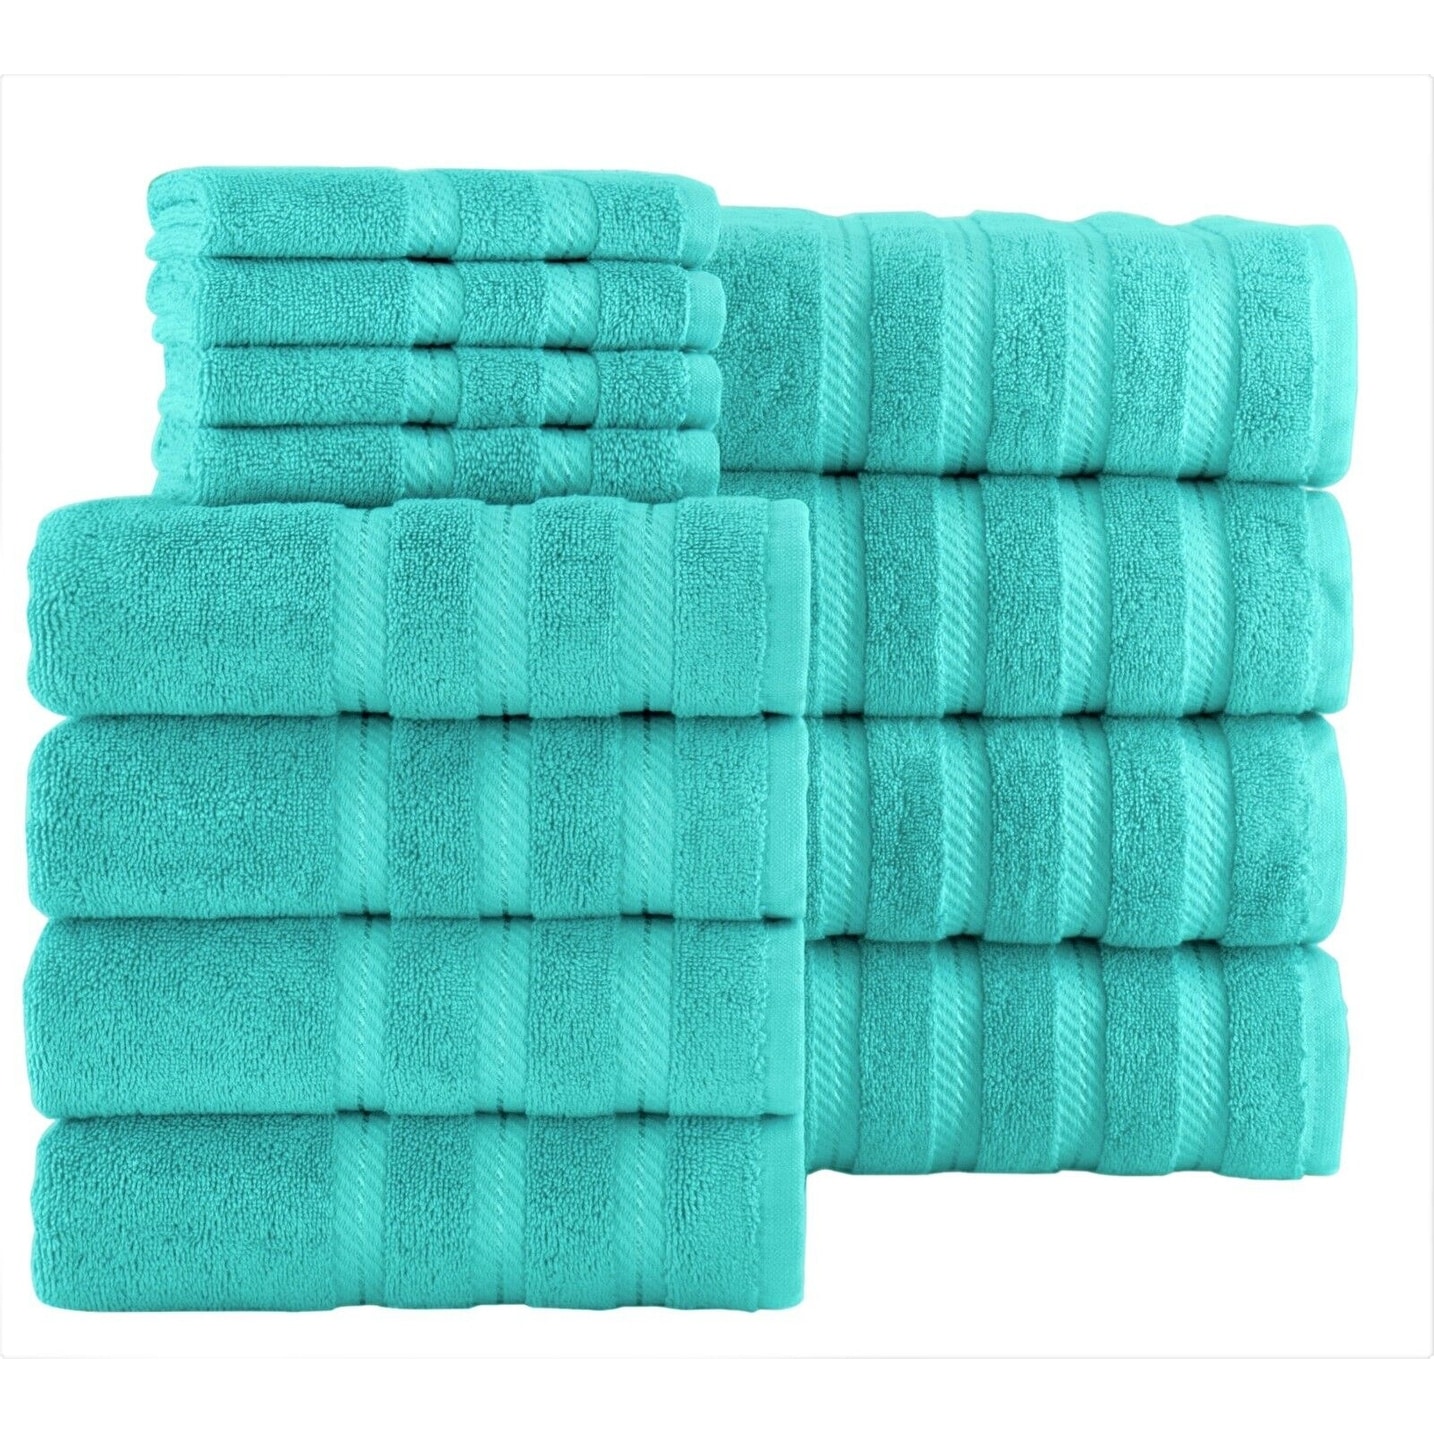 https://ak1.ostkcdn.com/images/products/is/images/direct/da6a0d510bb1a4a9cbe2afb0c8ab8b8b0025e828/Antalya-Hotel-Collection-Turkish-Cotton-Bathroom-Towel-12-Pc-Family-Set.jpg